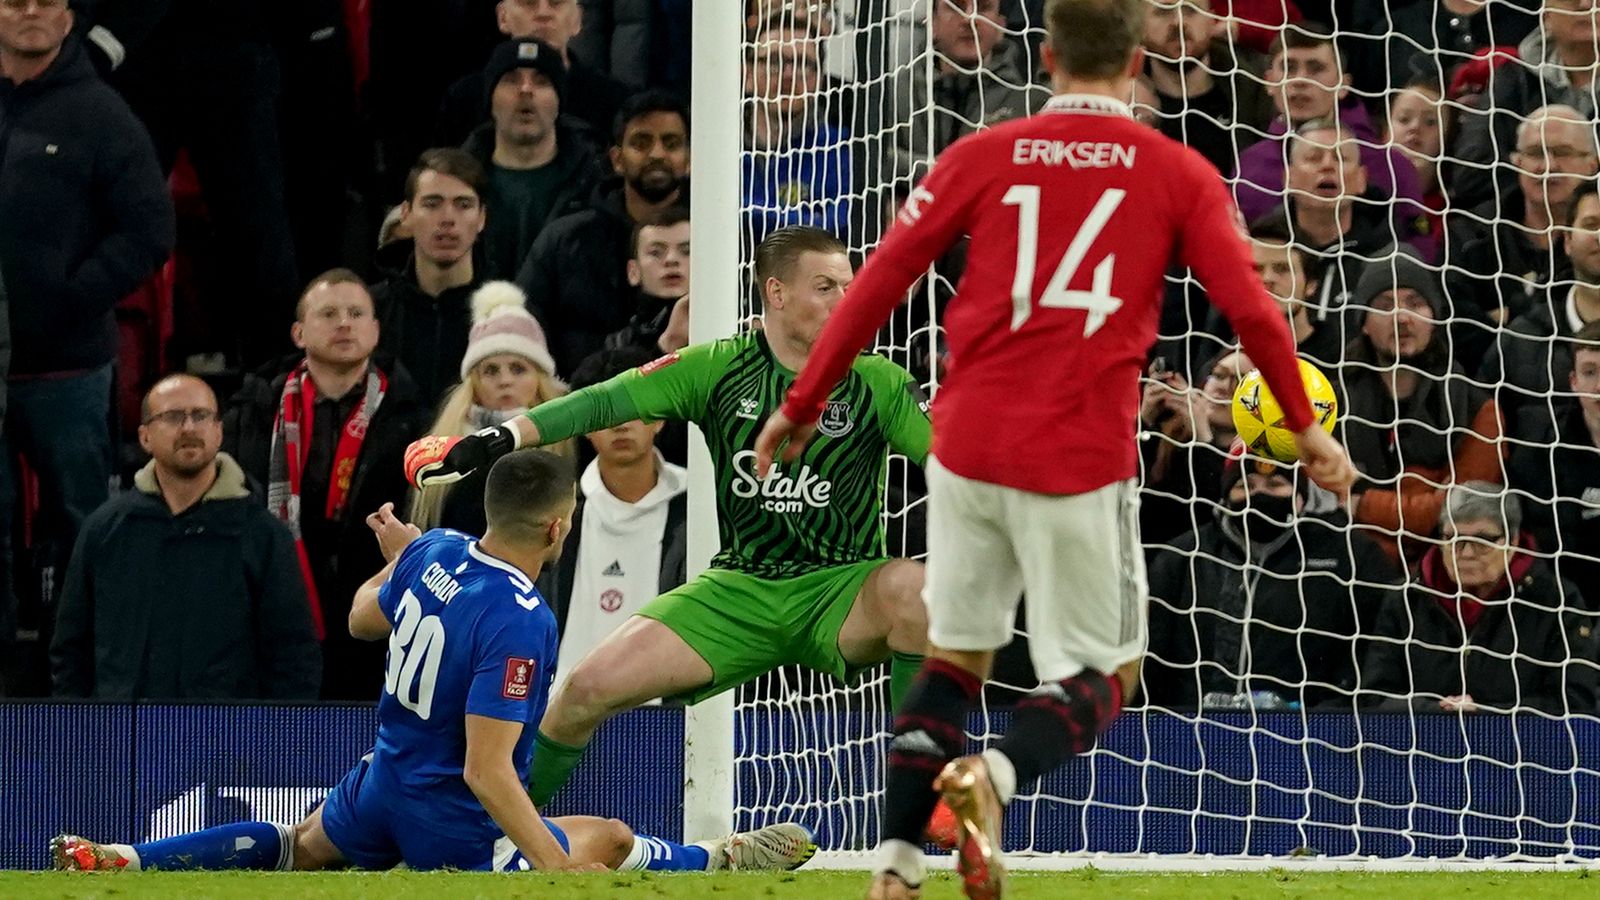 Manchester United claimed a nervy 3-1 victory over Everton in the FA Cup third round.